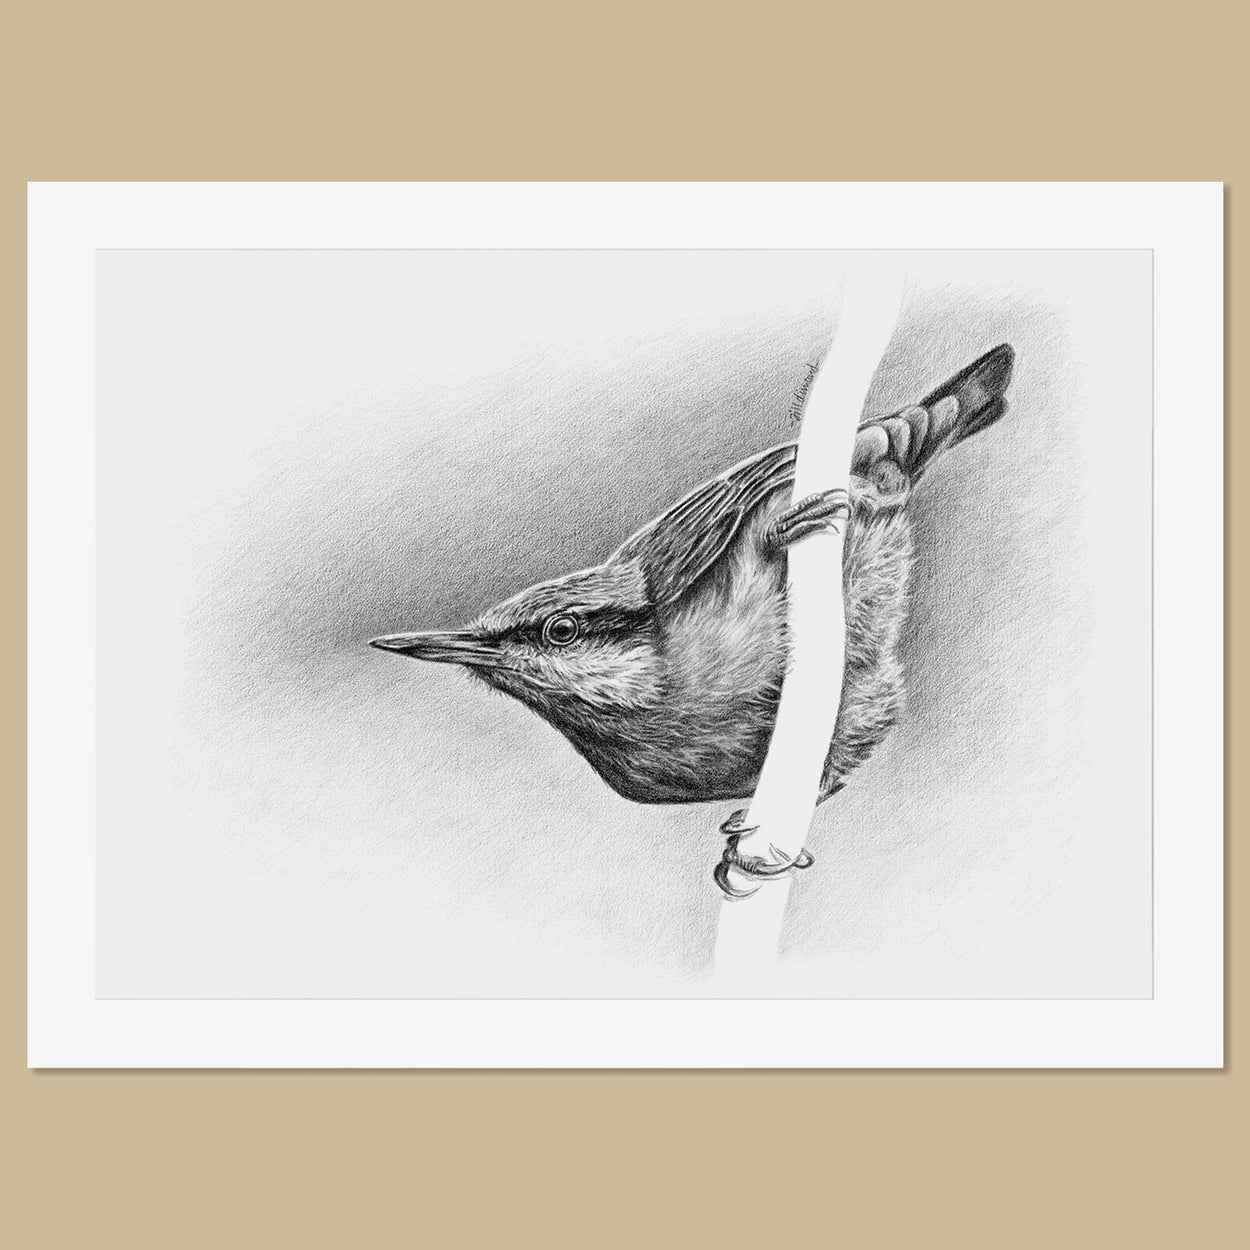 Original Nuthatch Pencil Drawing - The Thriving Wild - Jill Dimond